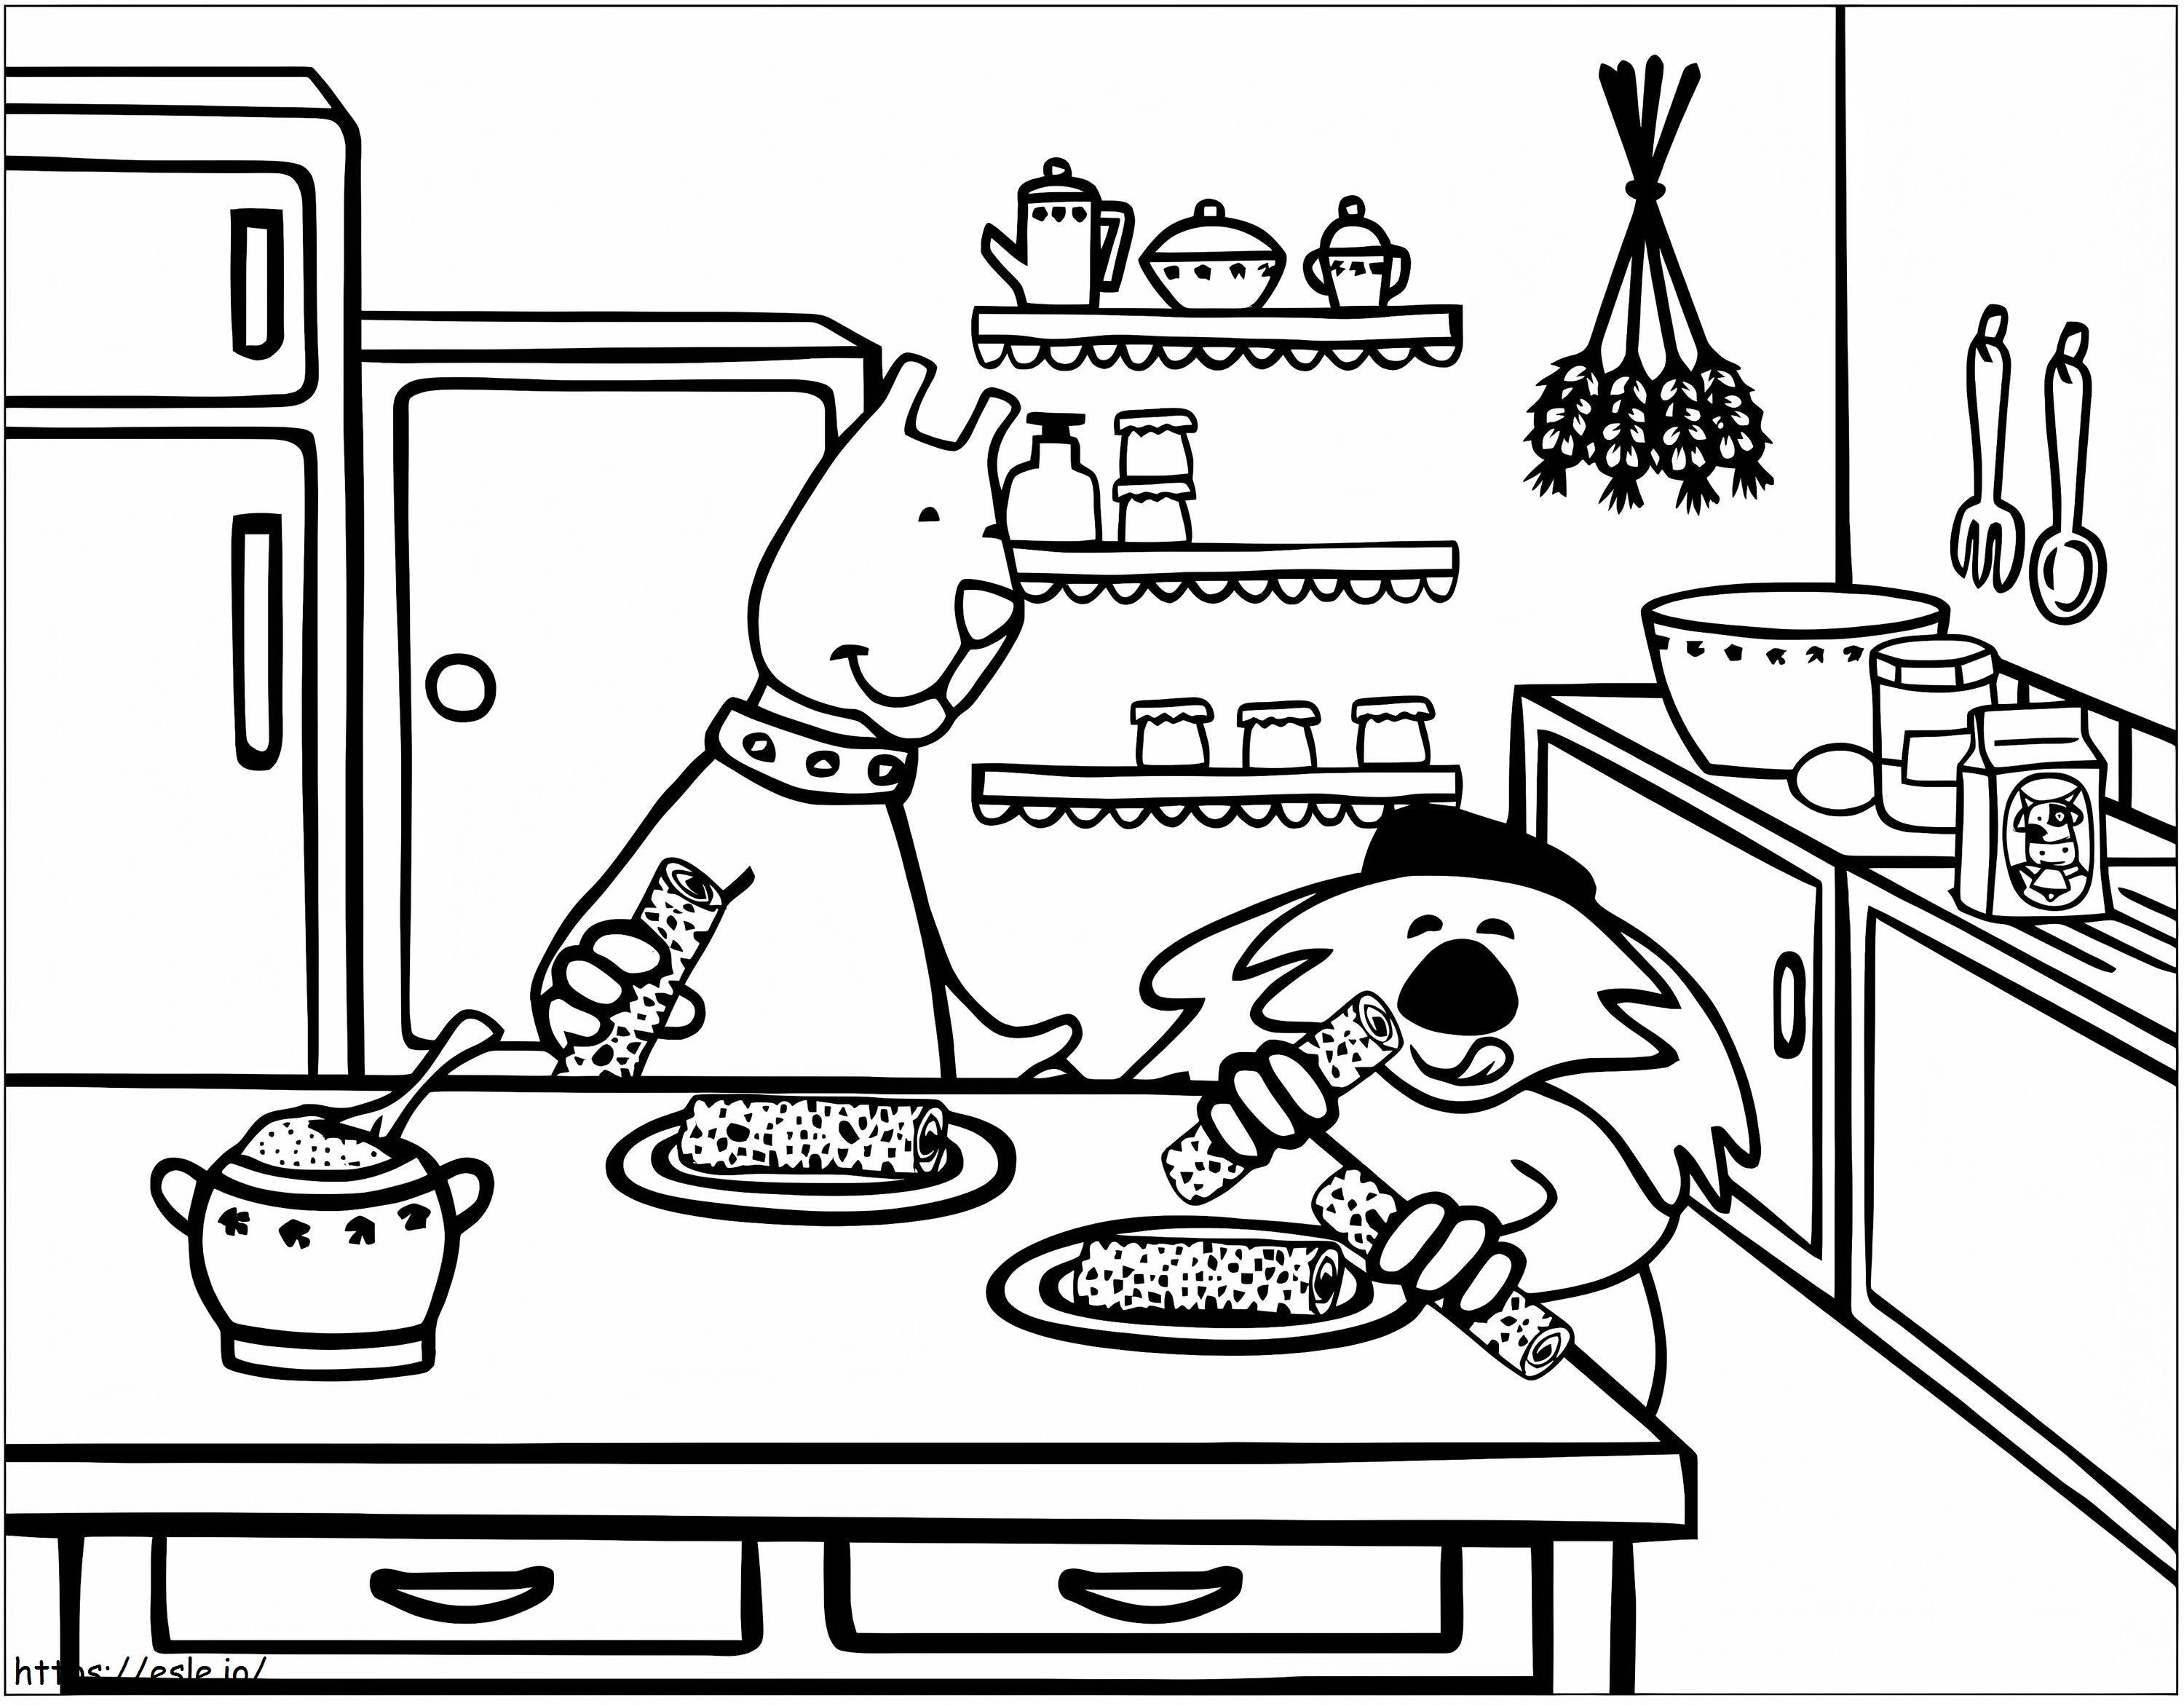 Animals Eating In The Kitchen coloring page